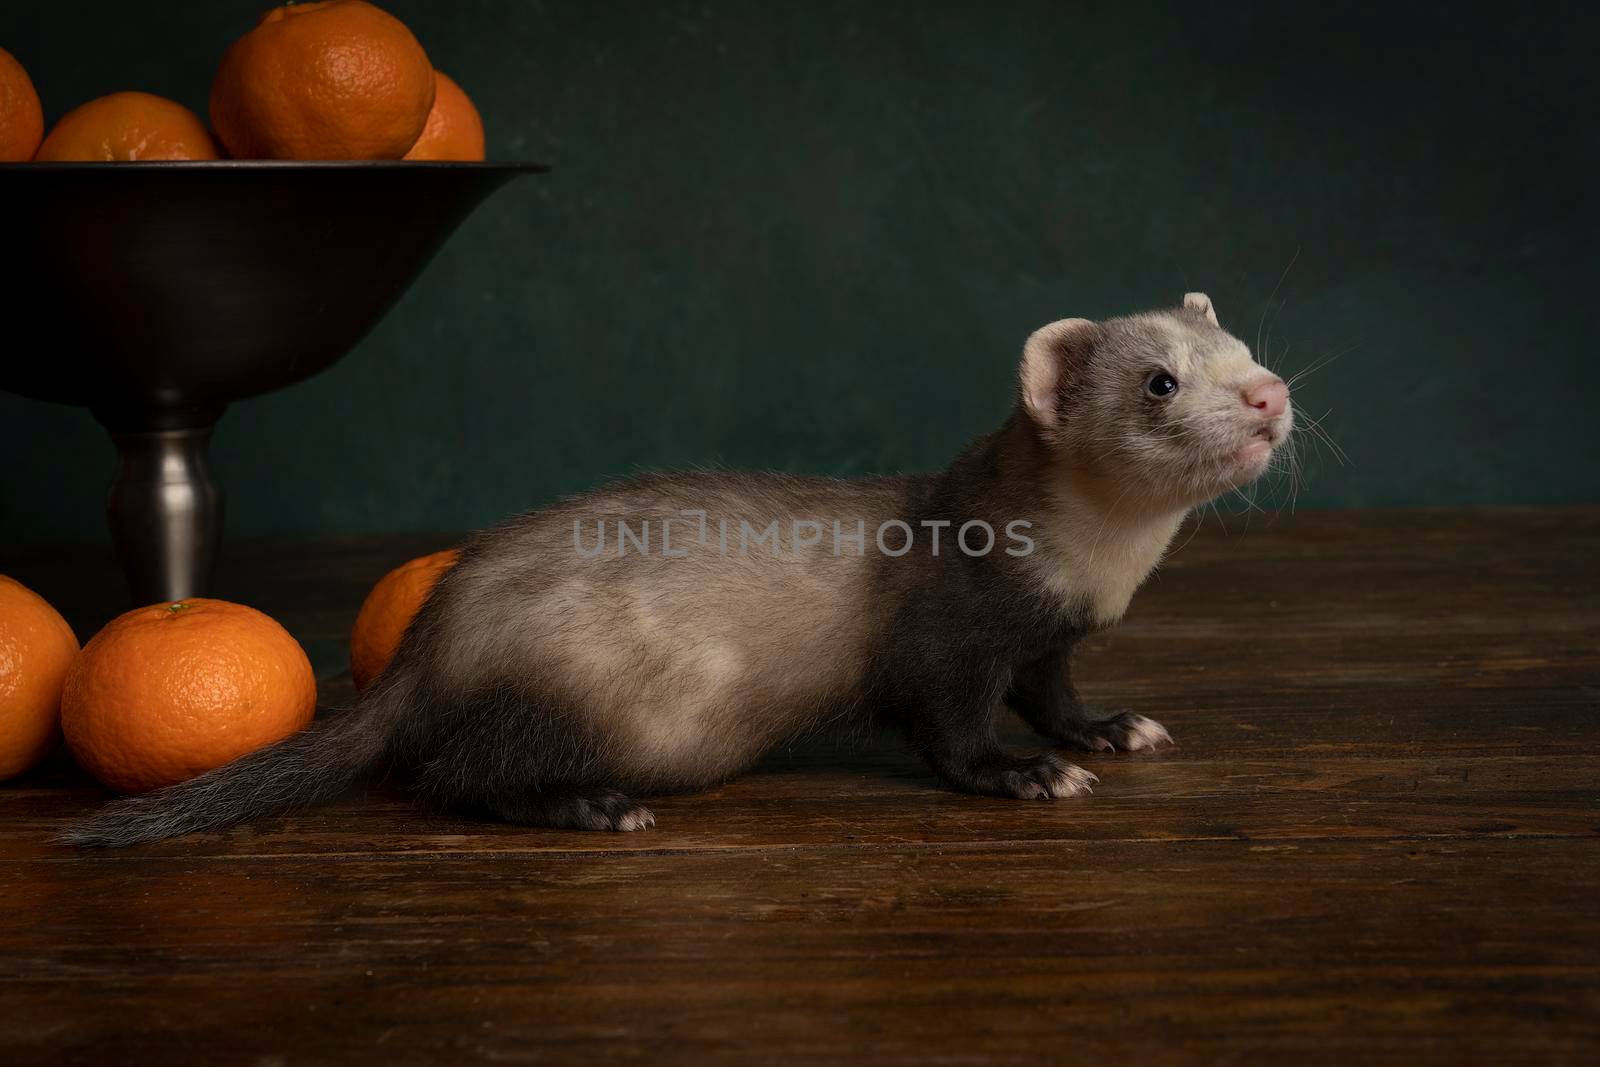 A young ferret or polecat puppy in a stillife scene with tangerines against a green background